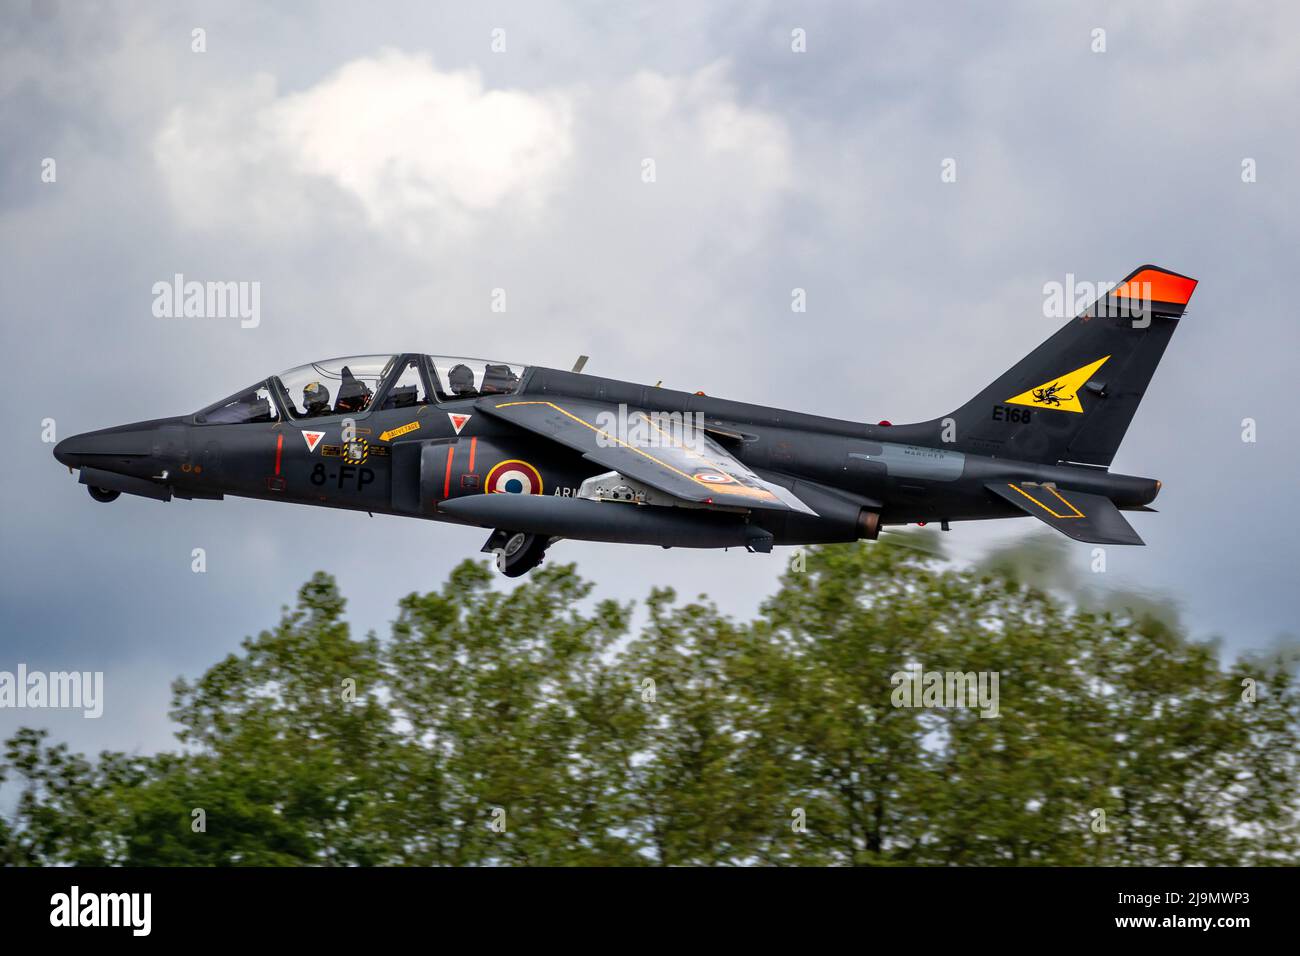 French Air Force Dassault-Dorner Alpha Jet training jet aircraft taking off from Mont-de-Marsan Air Base. France - May 17, 2019 Stock Photo